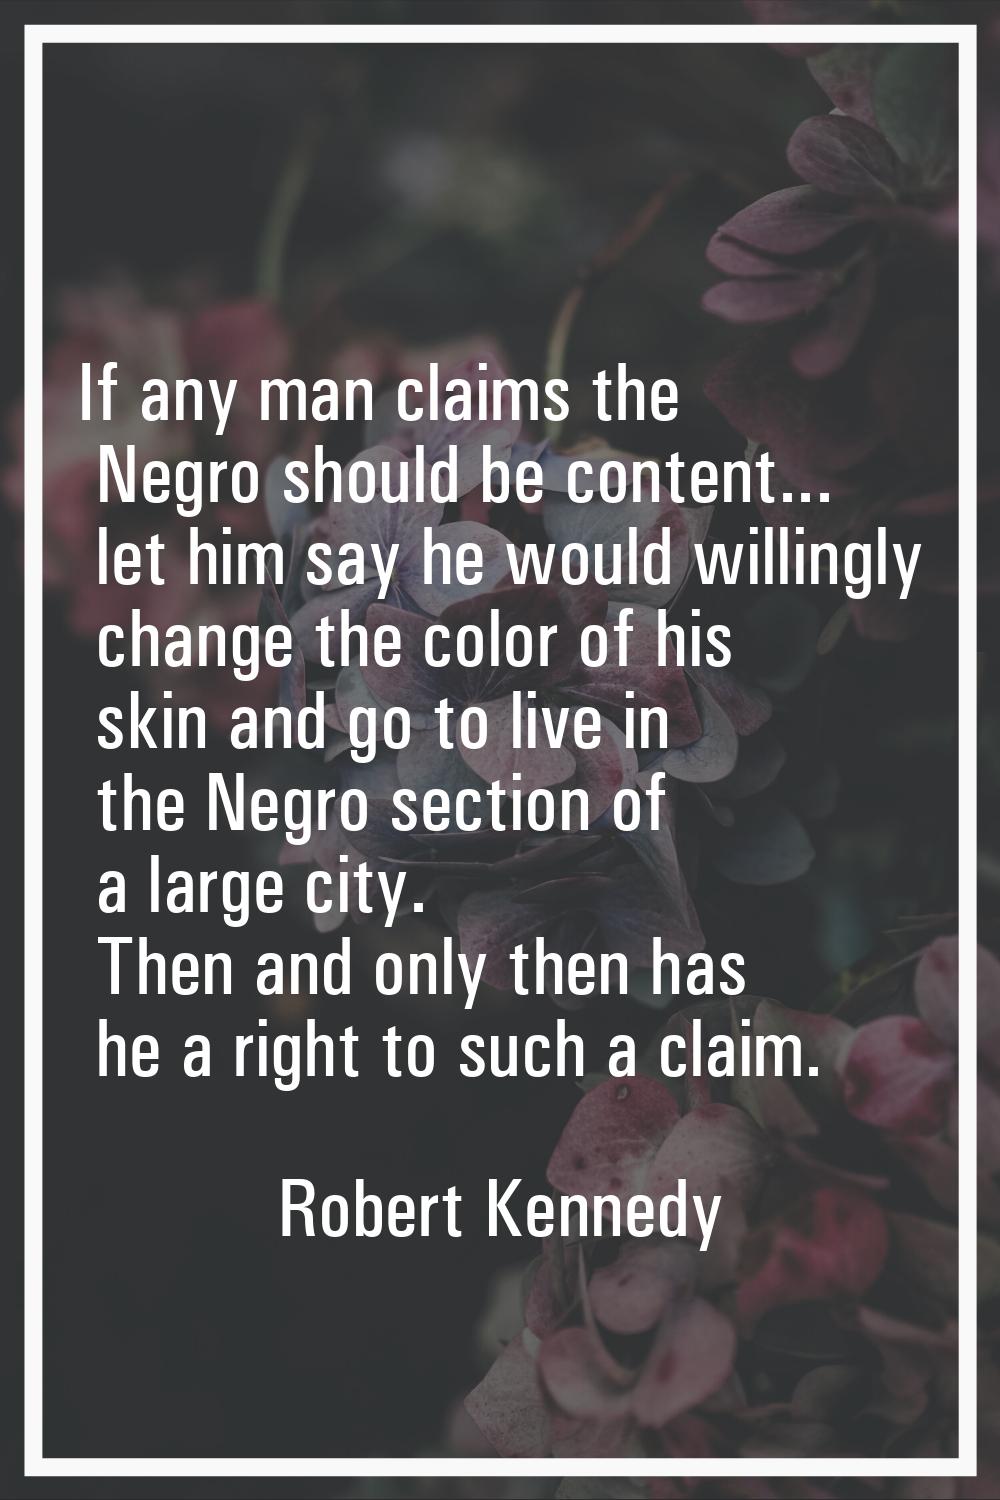 If any man claims the Negro should be content... let him say he would willingly change the color of